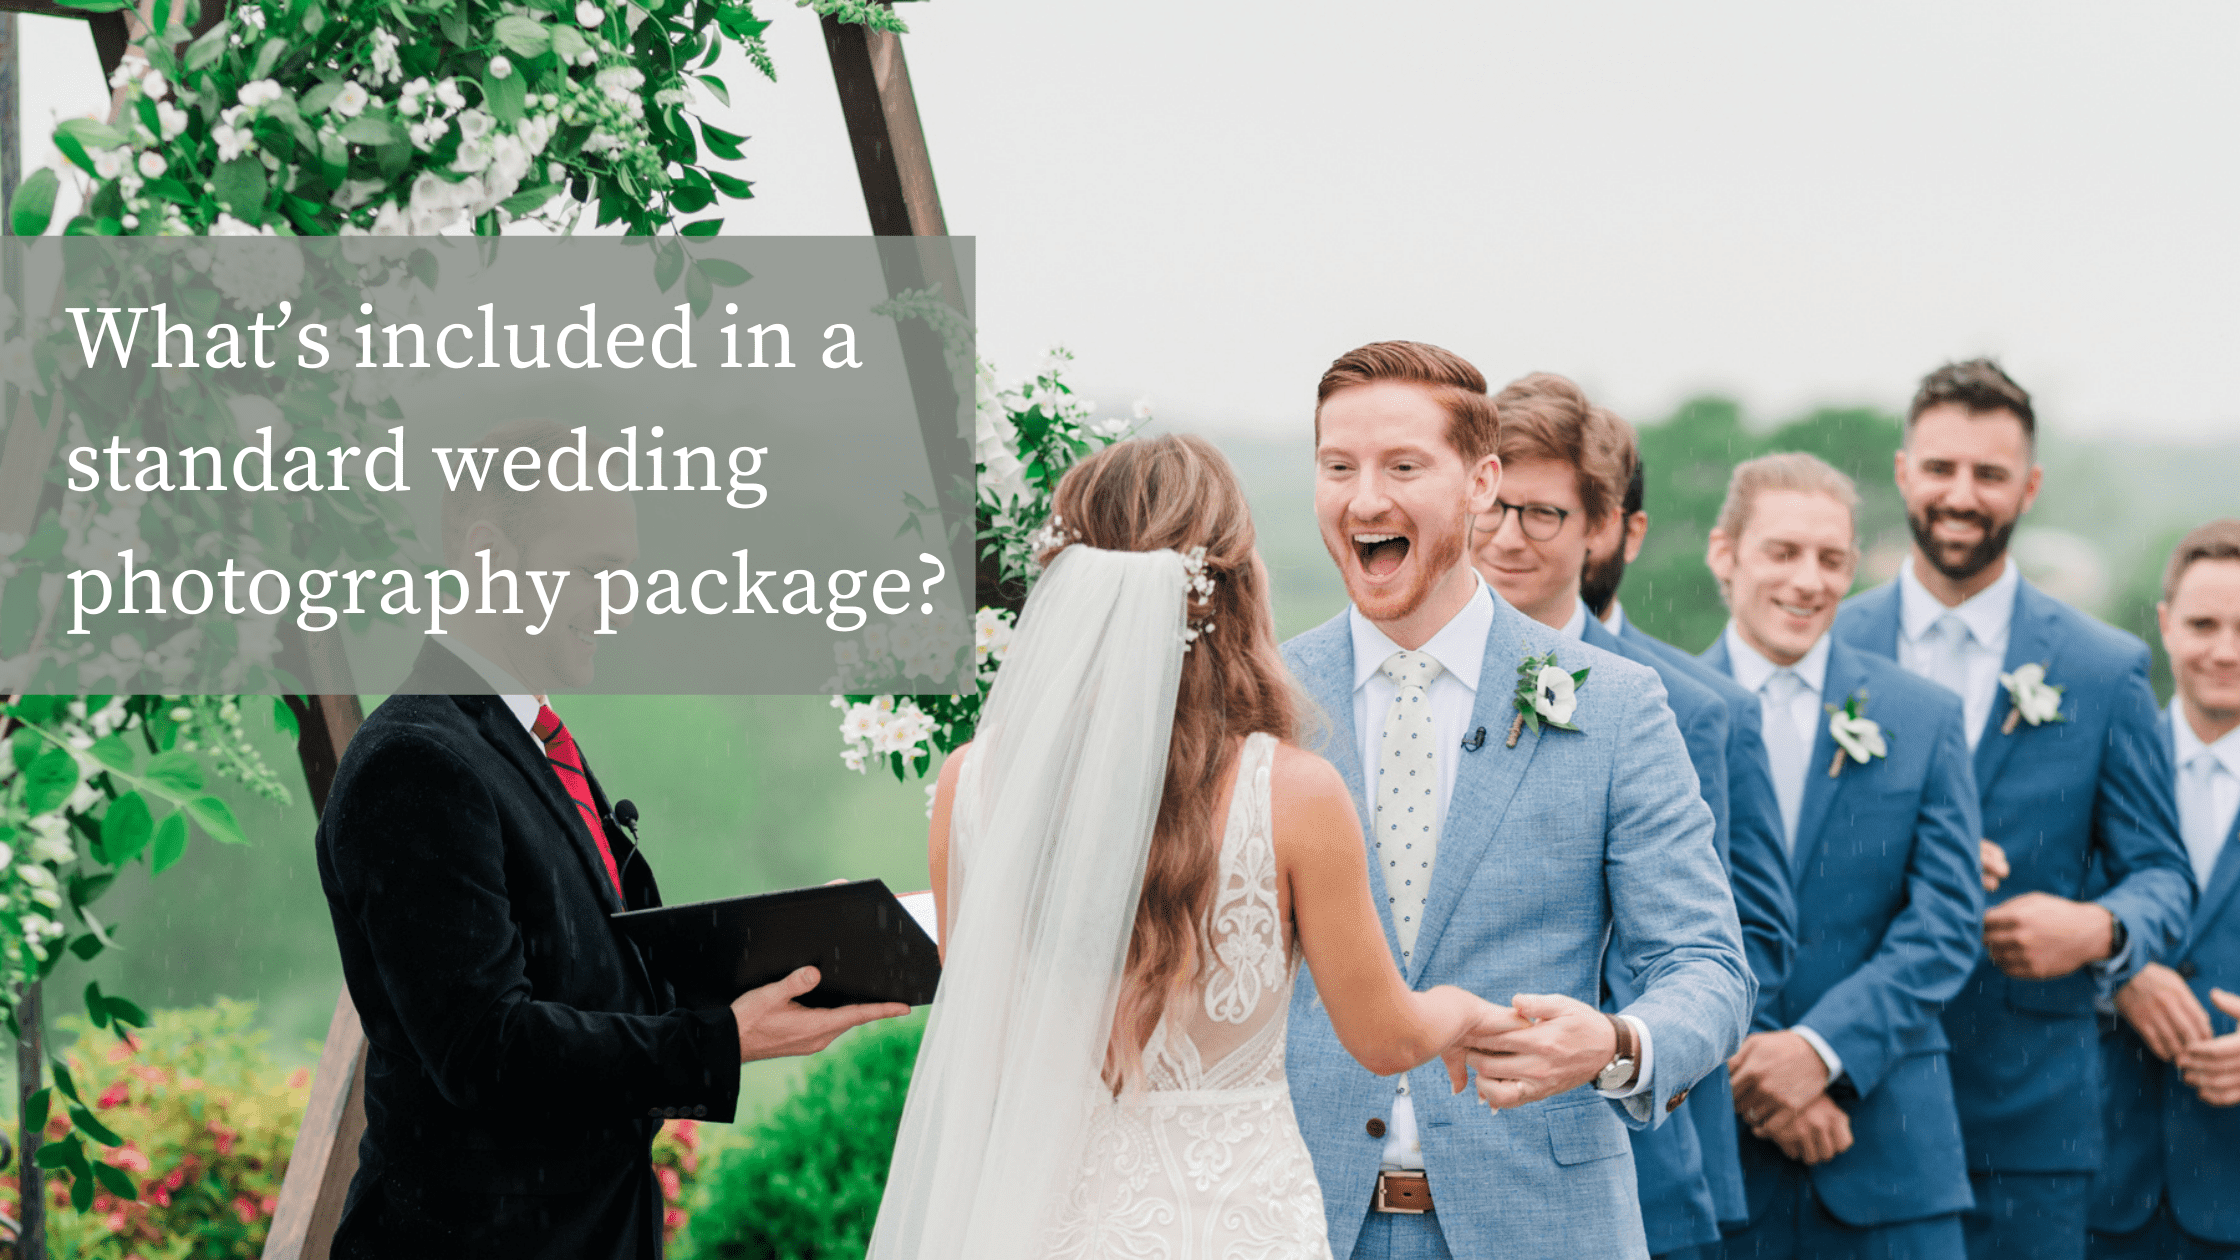 Dramatic image of groom's excited face just before they are announced husband and wife during a wedding ceremony. Left overlay on the left reads: 